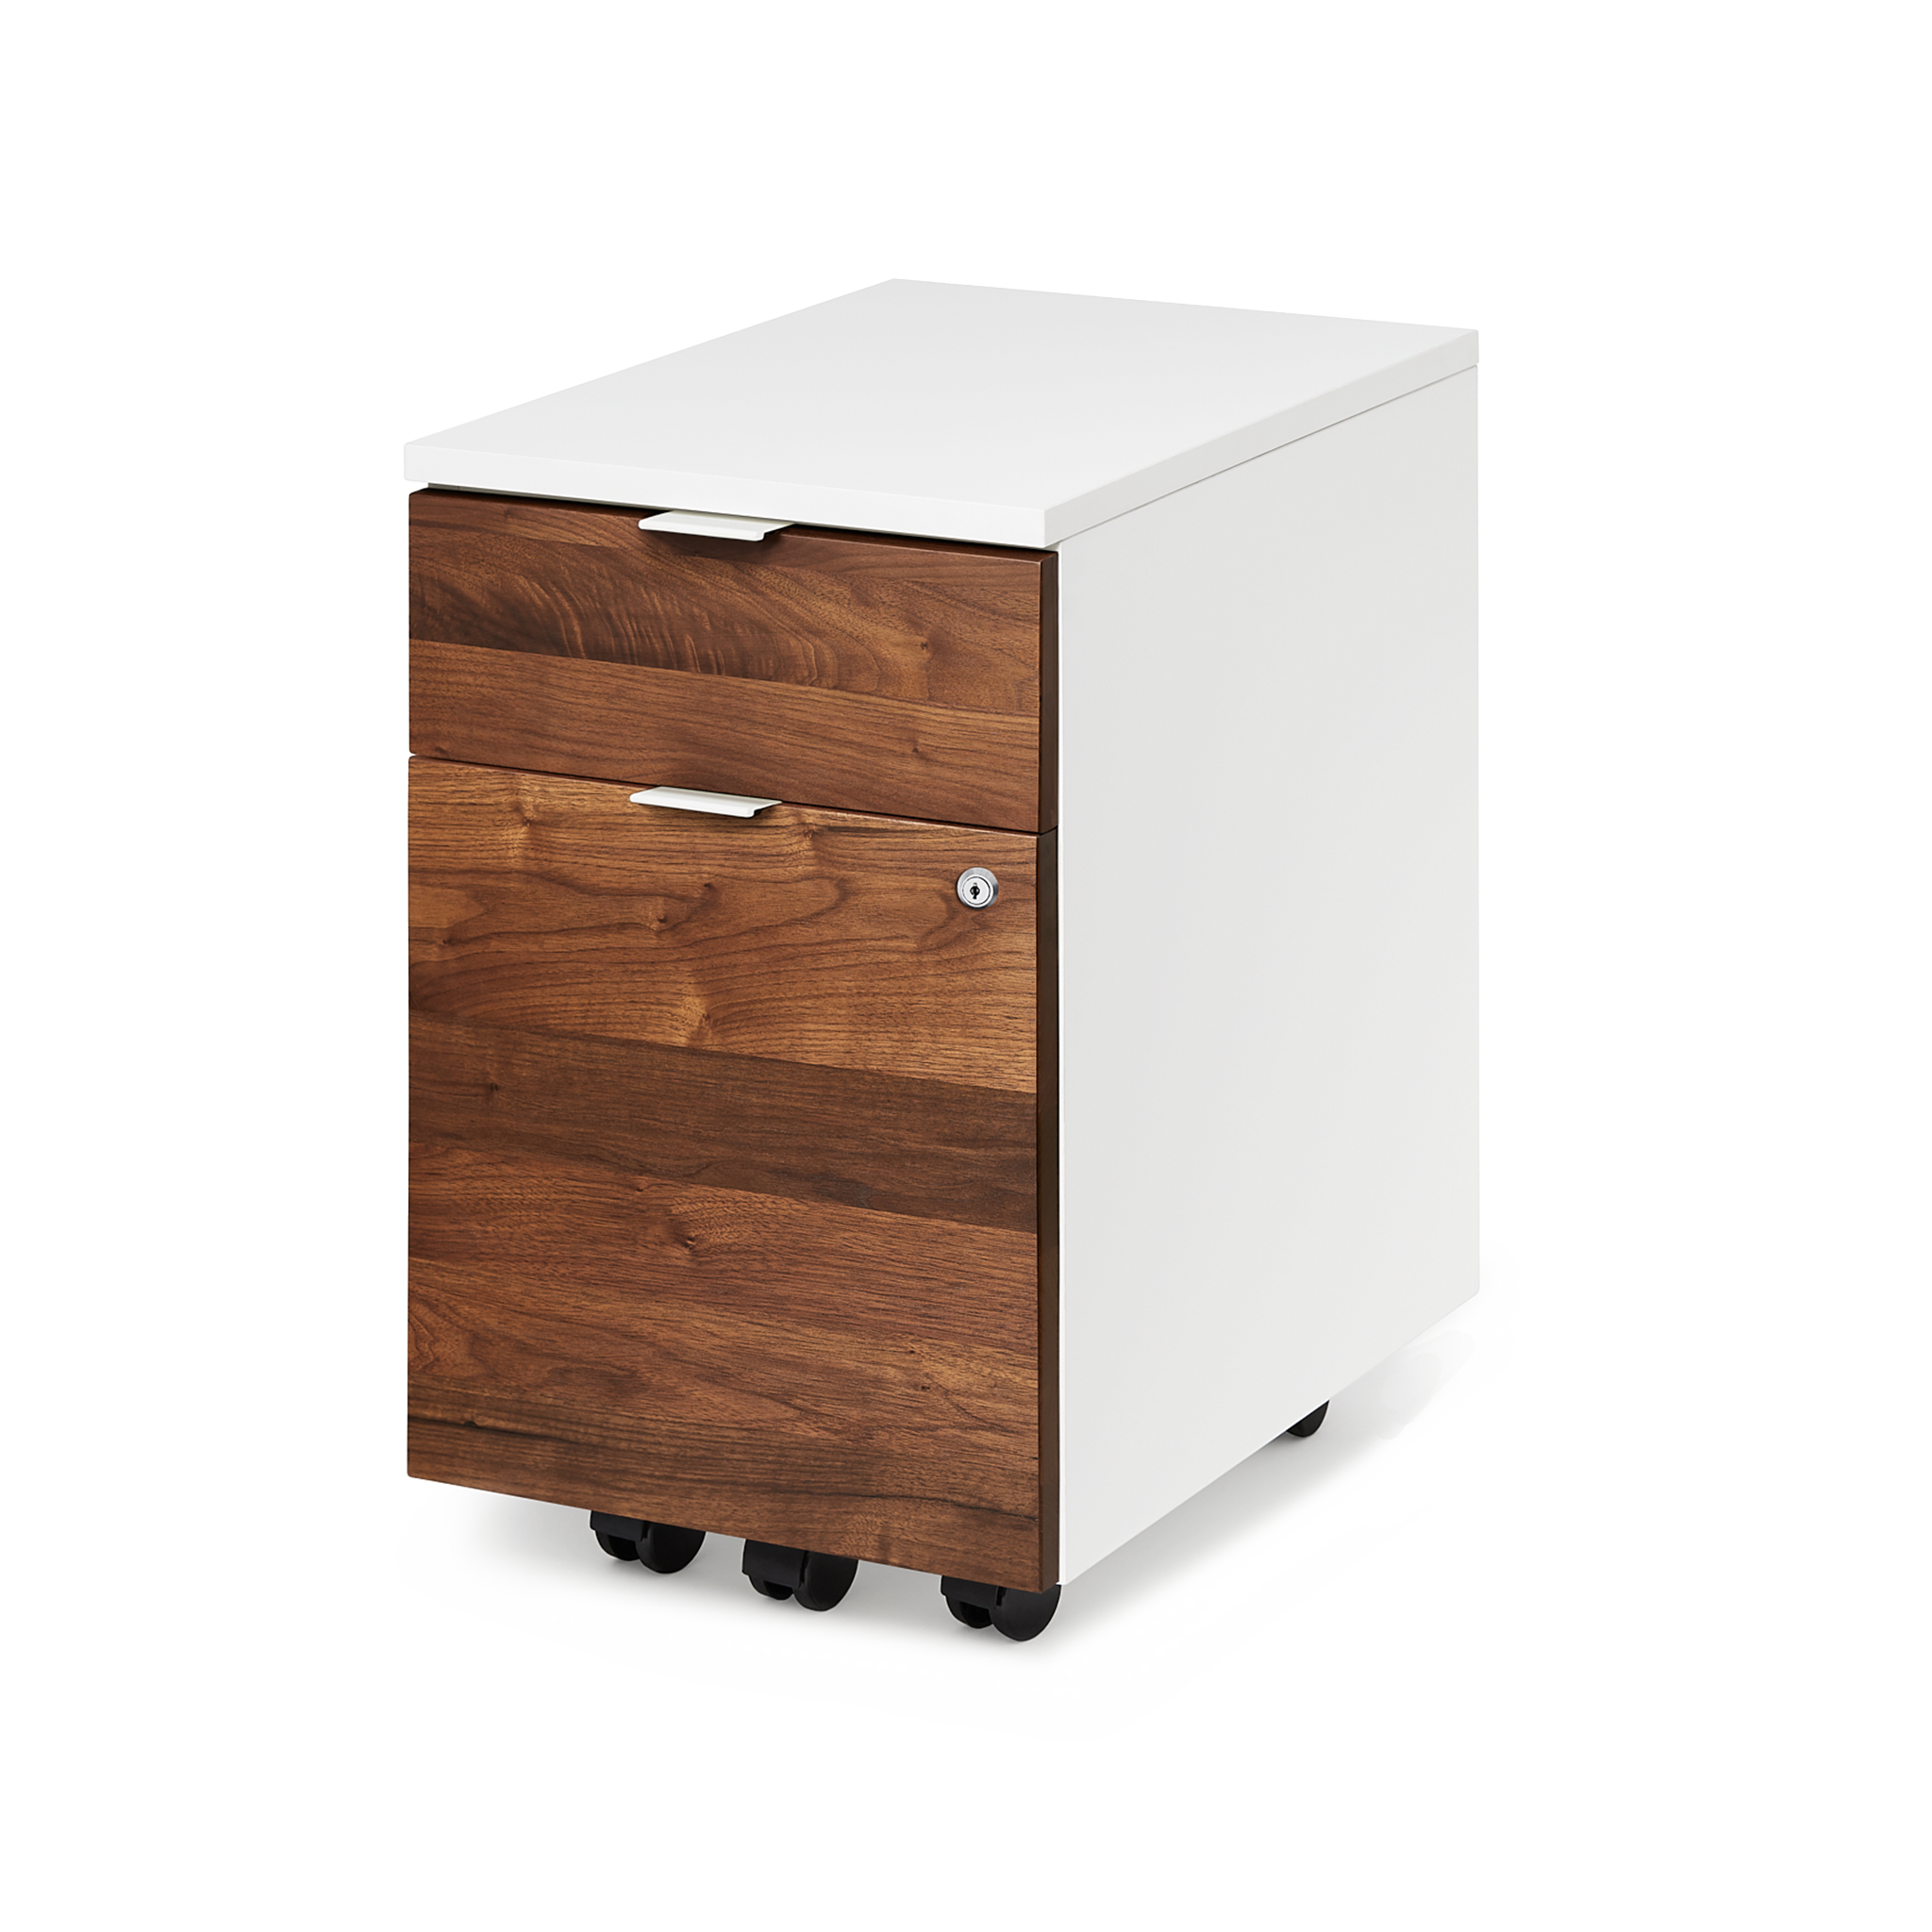 Neat Filing Cabinet - Cabinet-Color-White/Front-Panels-Walnut - Cabinet-Color-Blanc/Front-Panels-Noyer